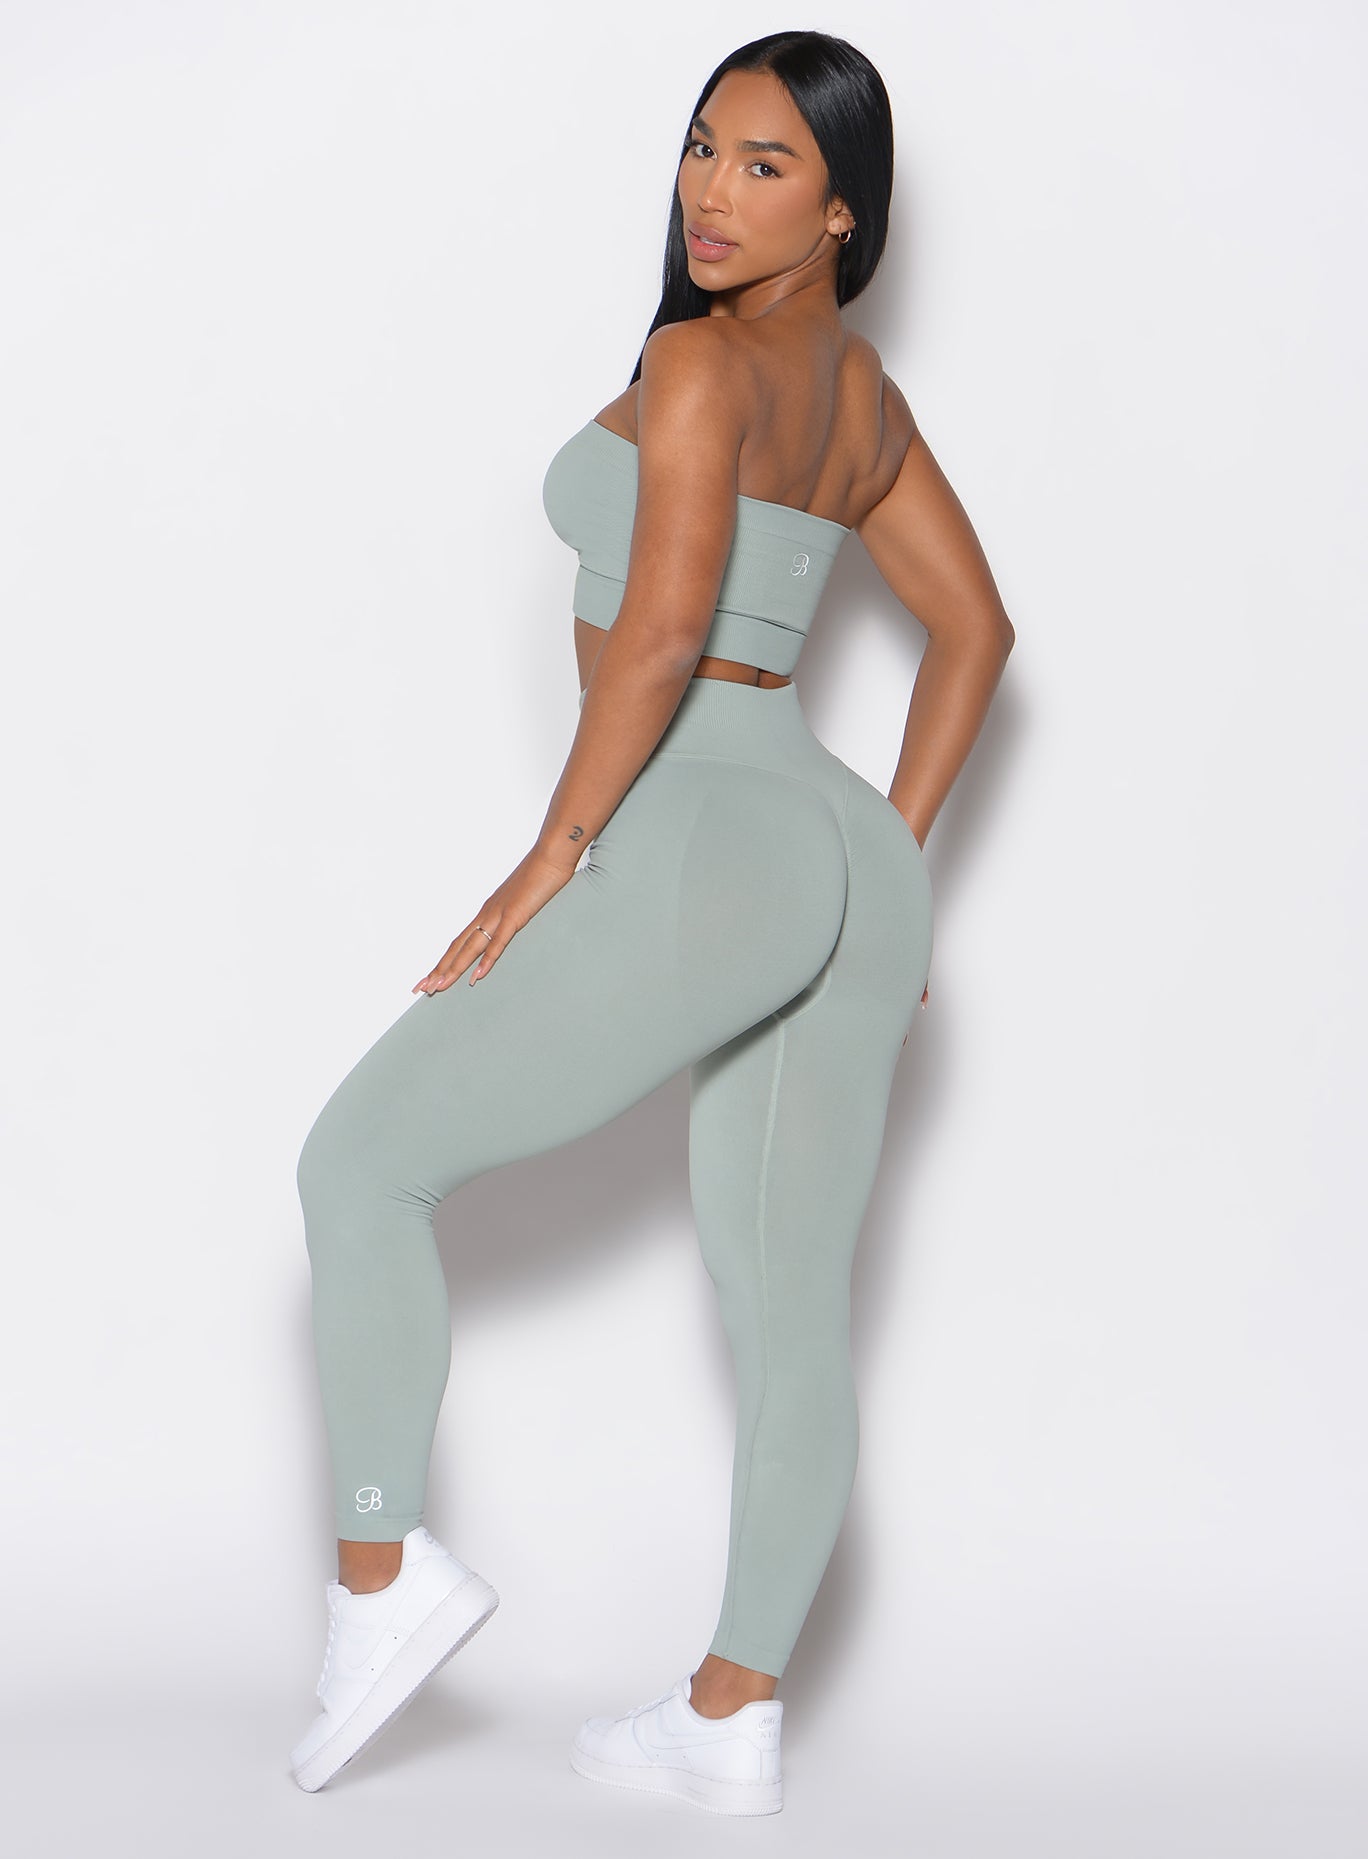 left side profile view of a model facing to her left  wearing our cheeky seamless leggings in light jade color along with the matching top